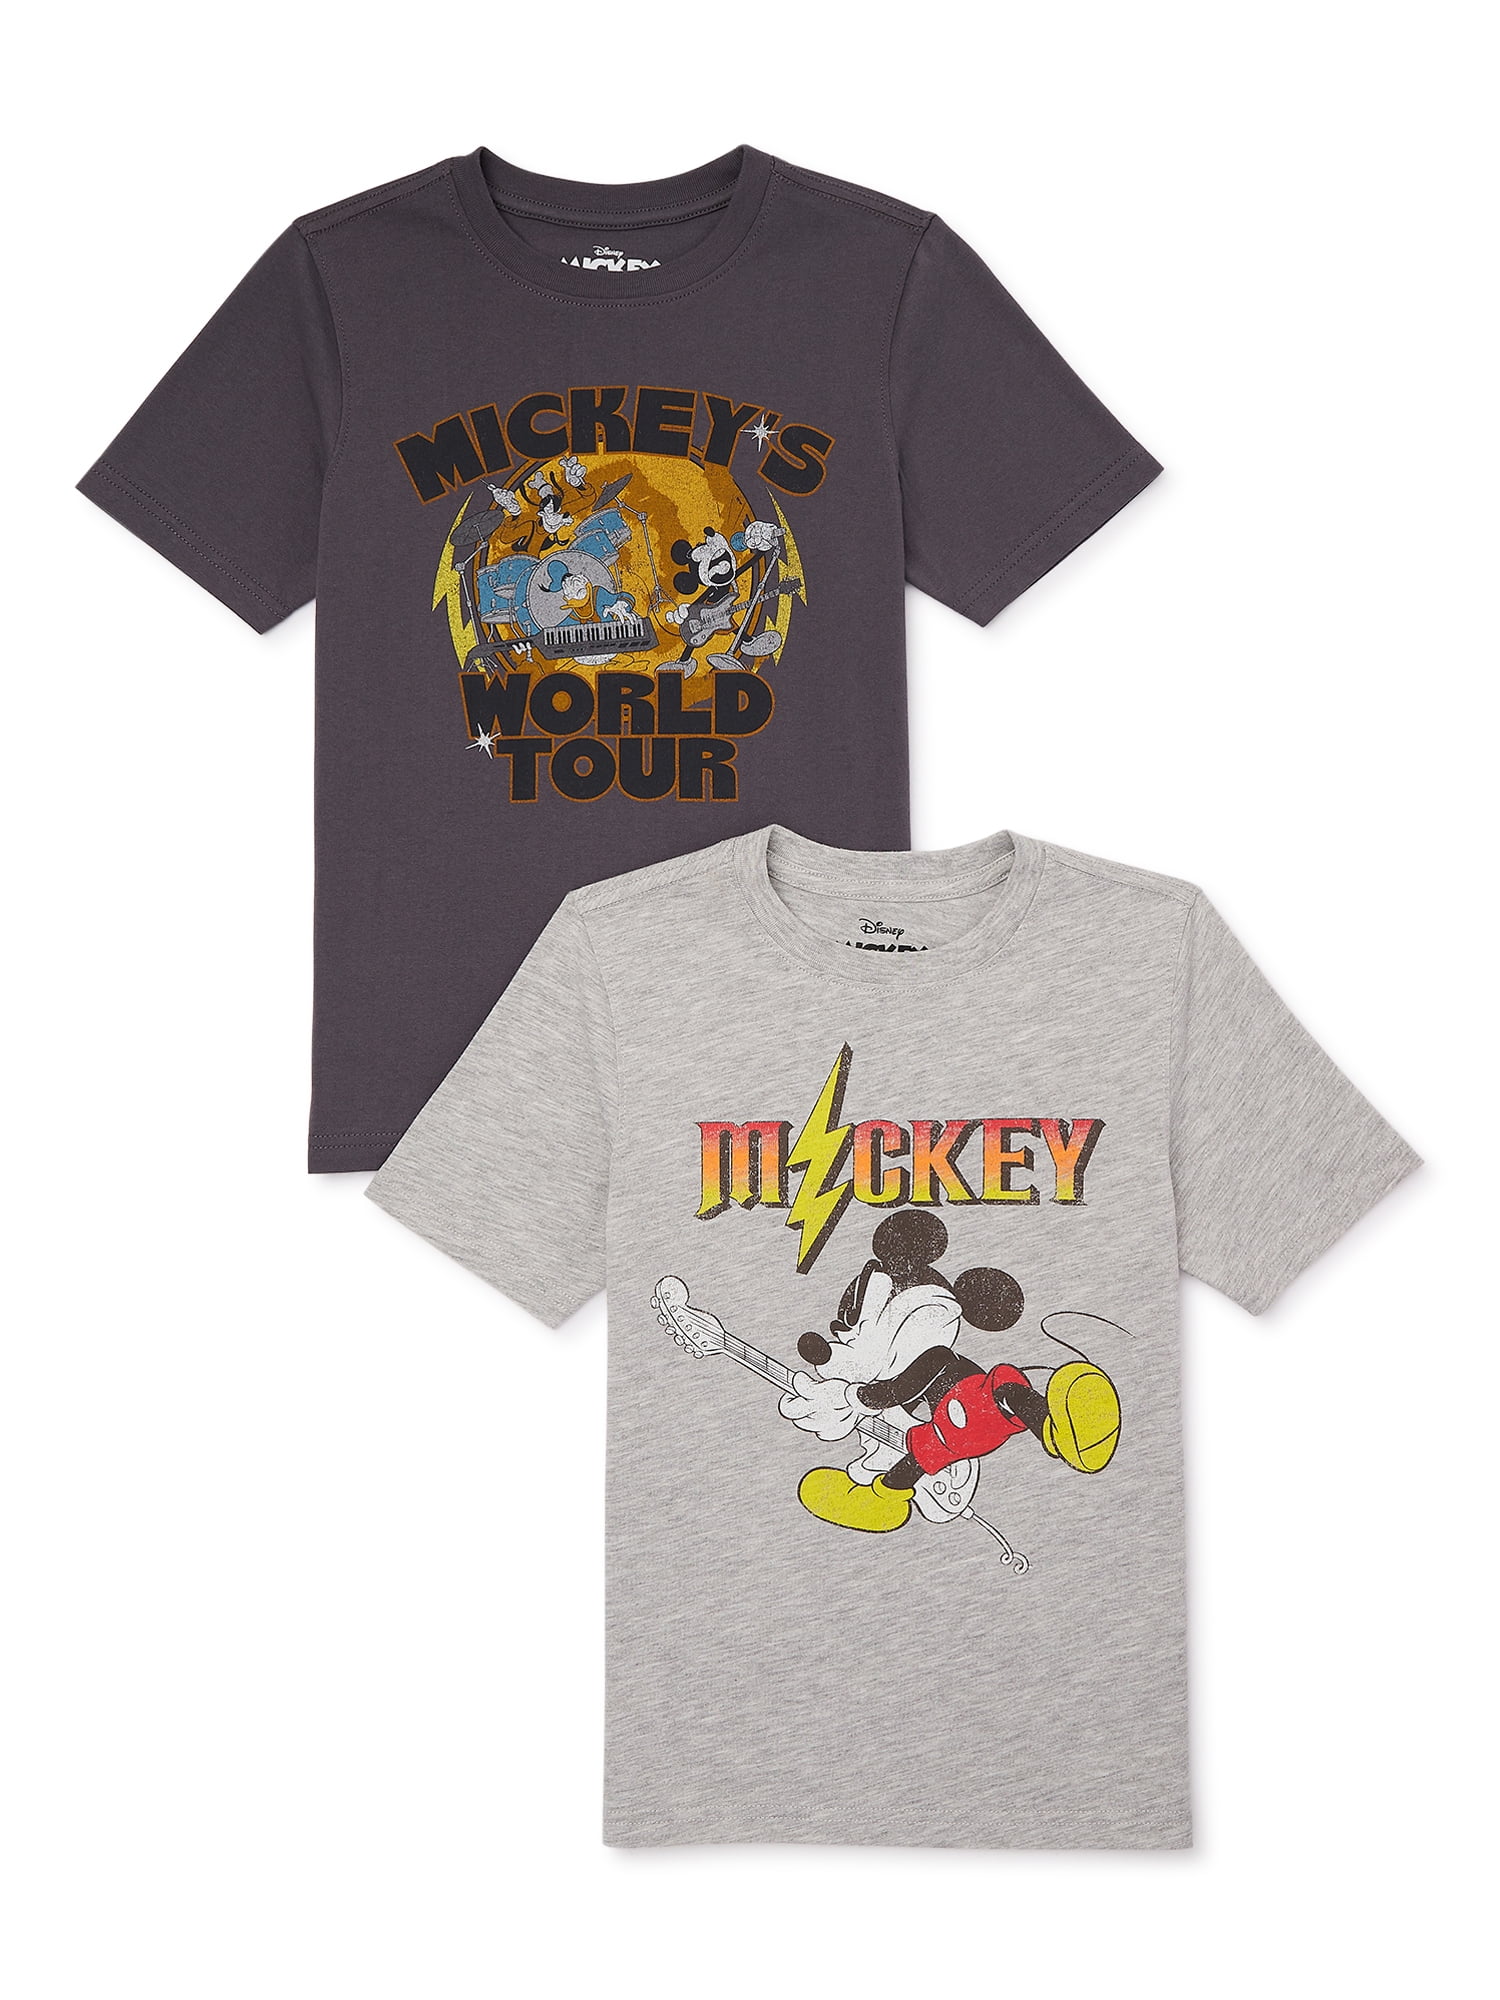 4-18 Graphic T-Shirt, Rocker 2-Pack, Sizes Mouse Mickey Boys Print